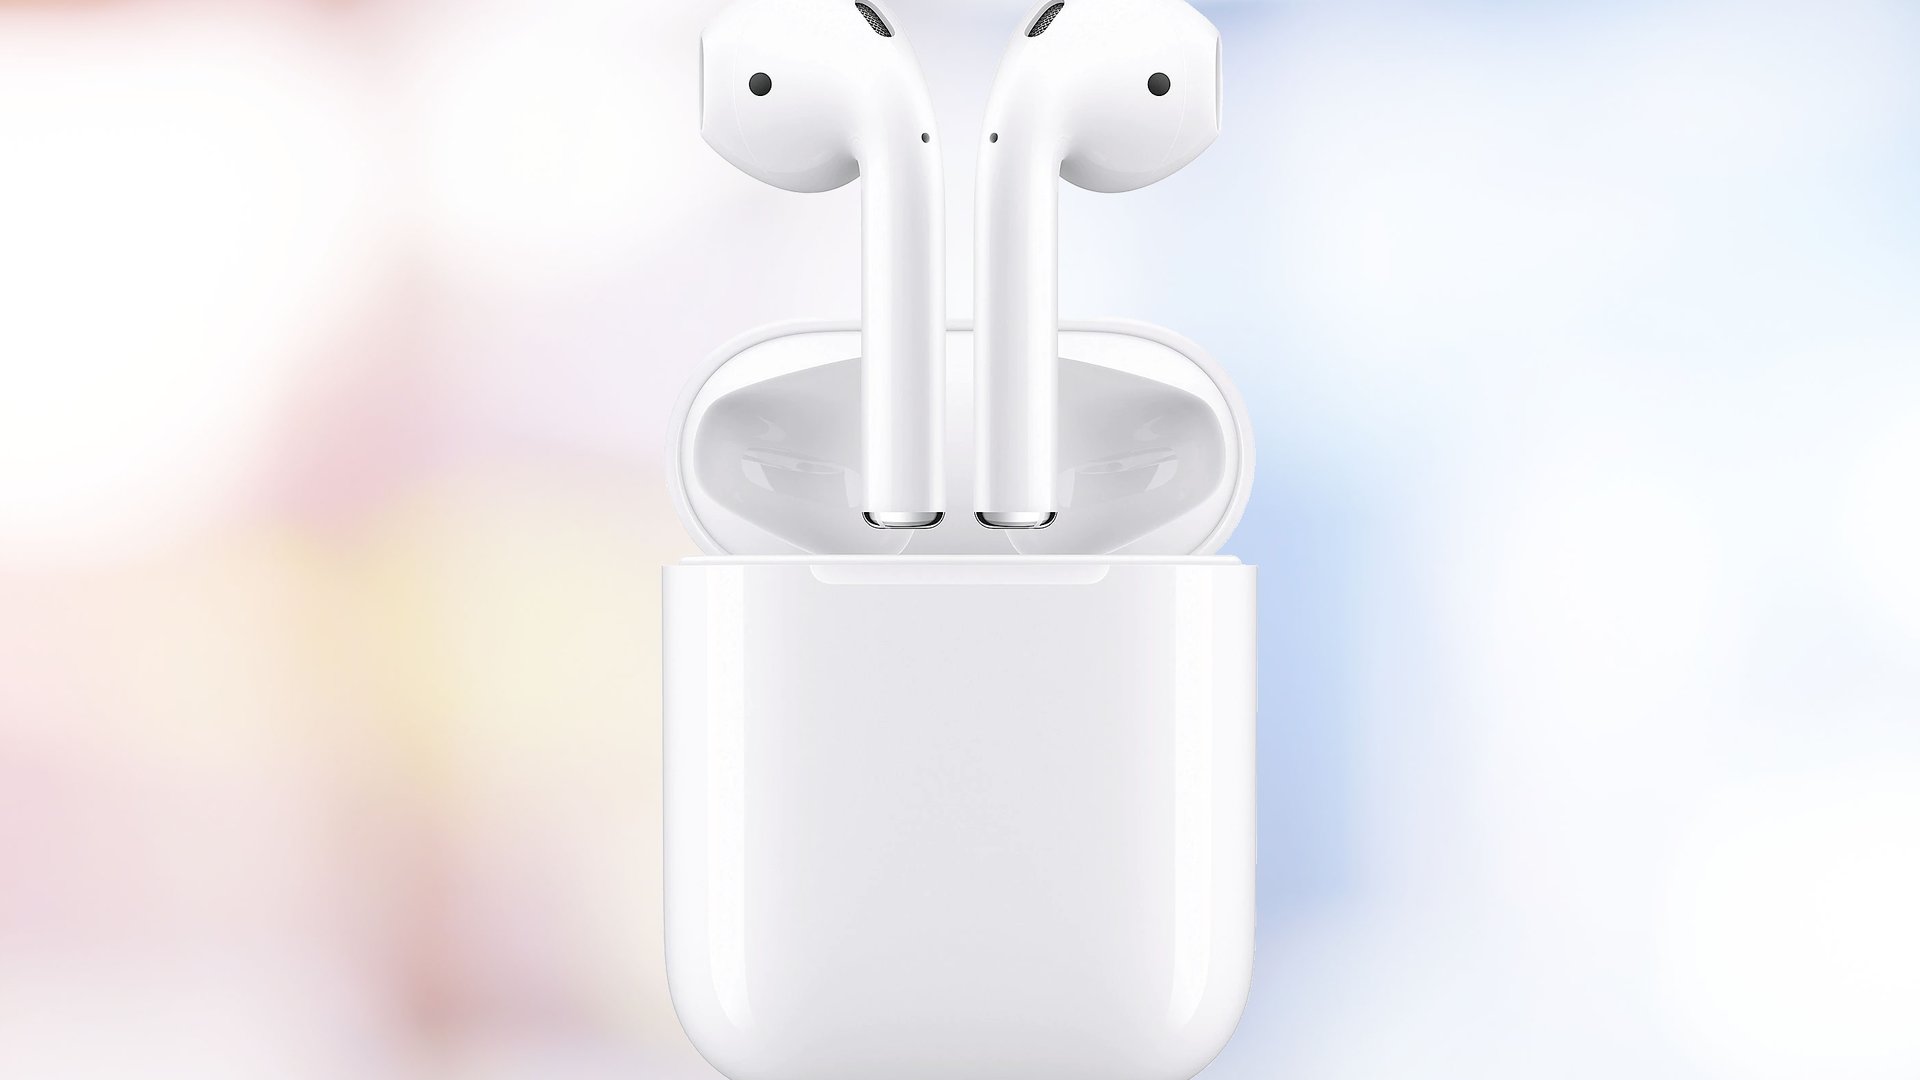 Airpods space. Apple AIRPODS 2. Apple AIRPODS 3rd Generation. Apple Earpods 3. Apple AIRPODS 2.2.